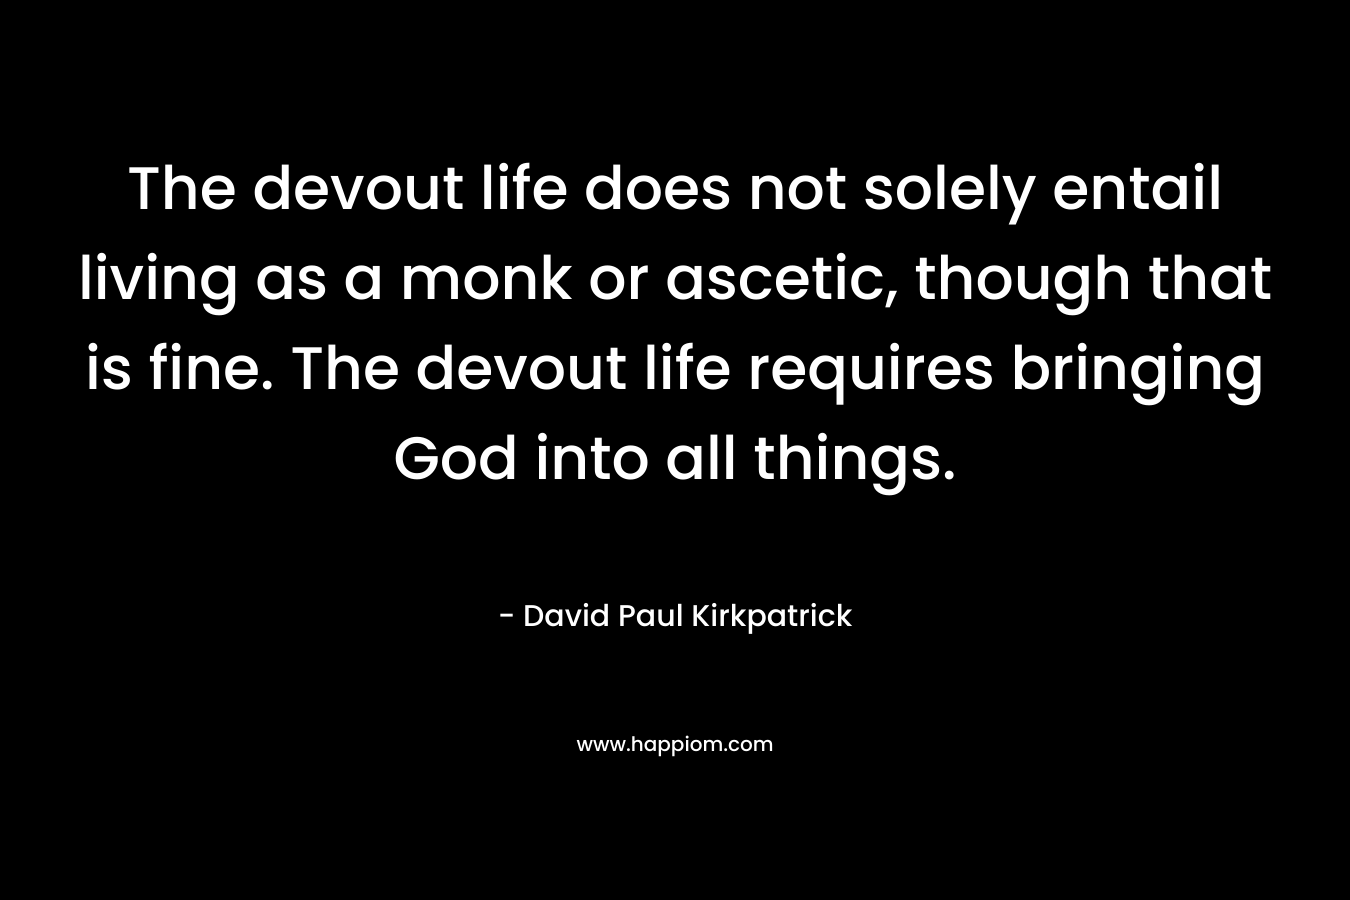 The devout life does not solely entail living as a monk or ascetic, though that is fine. The devout life requires bringing God into all things. – David Paul Kirkpatrick